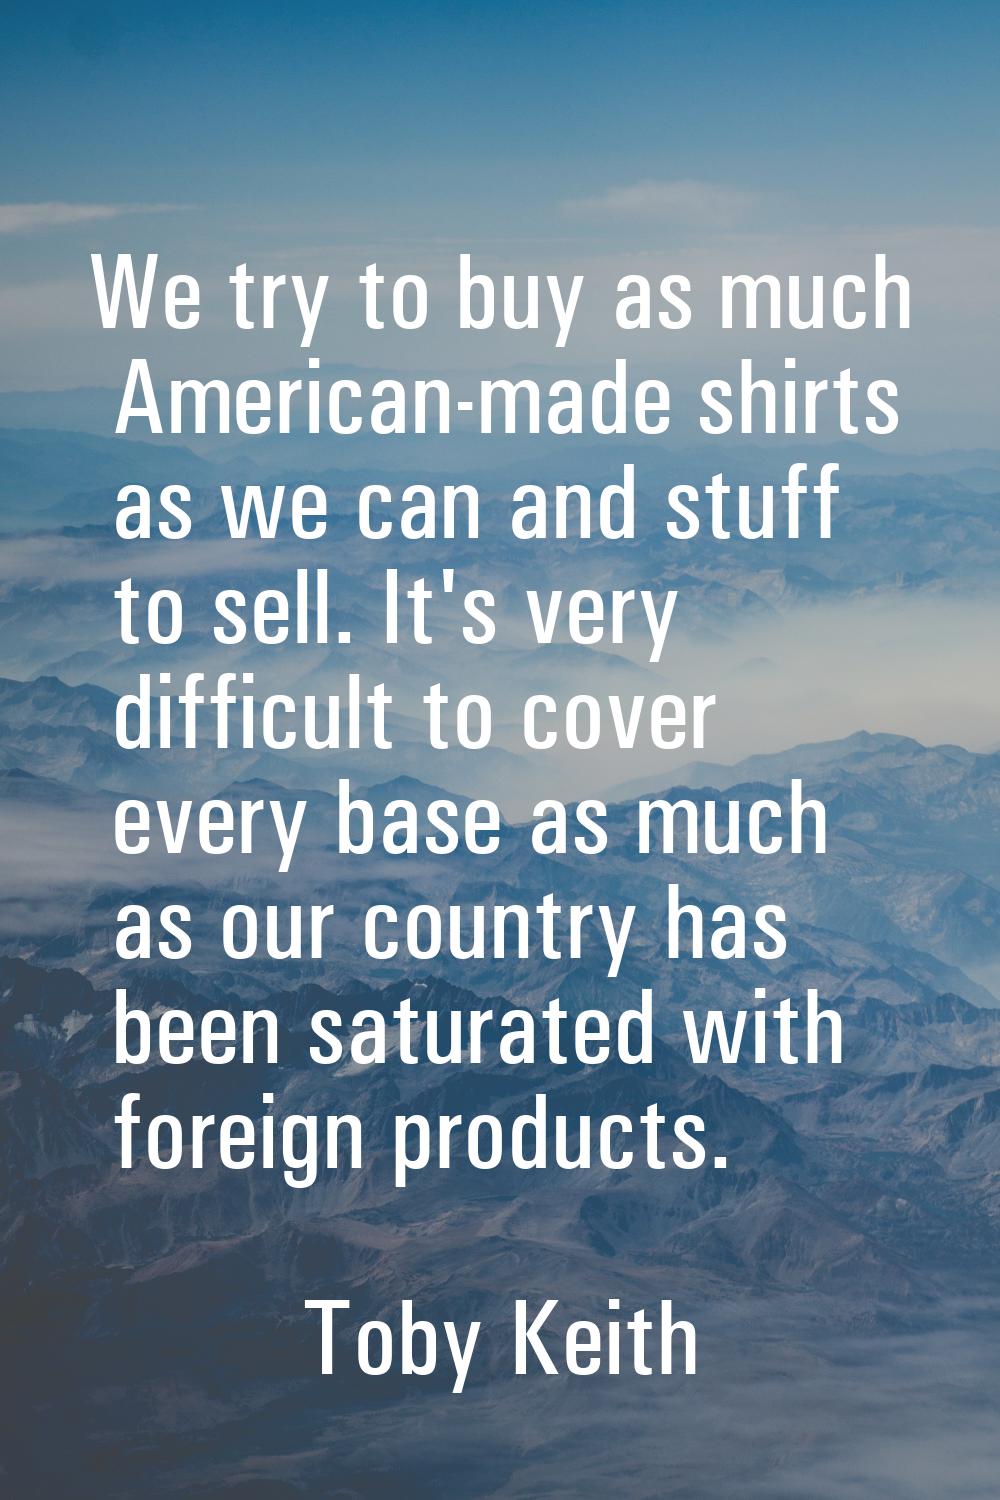 We try to buy as much American-made shirts as we can and stuff to sell. It's very difficult to cove